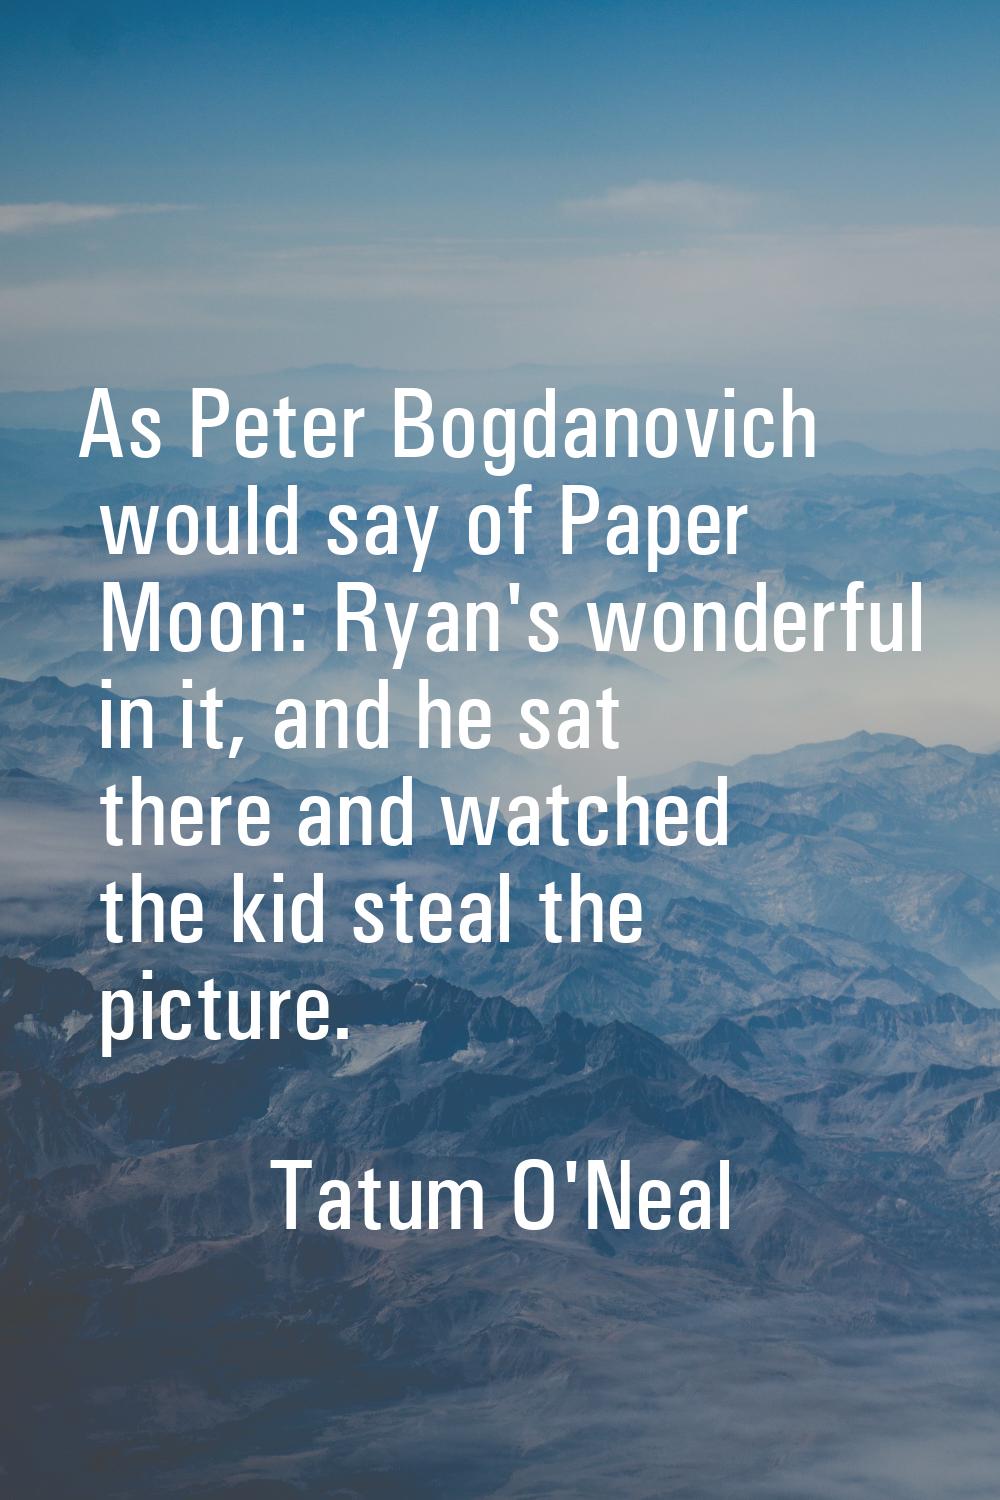 As Peter Bogdanovich would say of Paper Moon: Ryan's wonderful in it, and he sat there and watched 